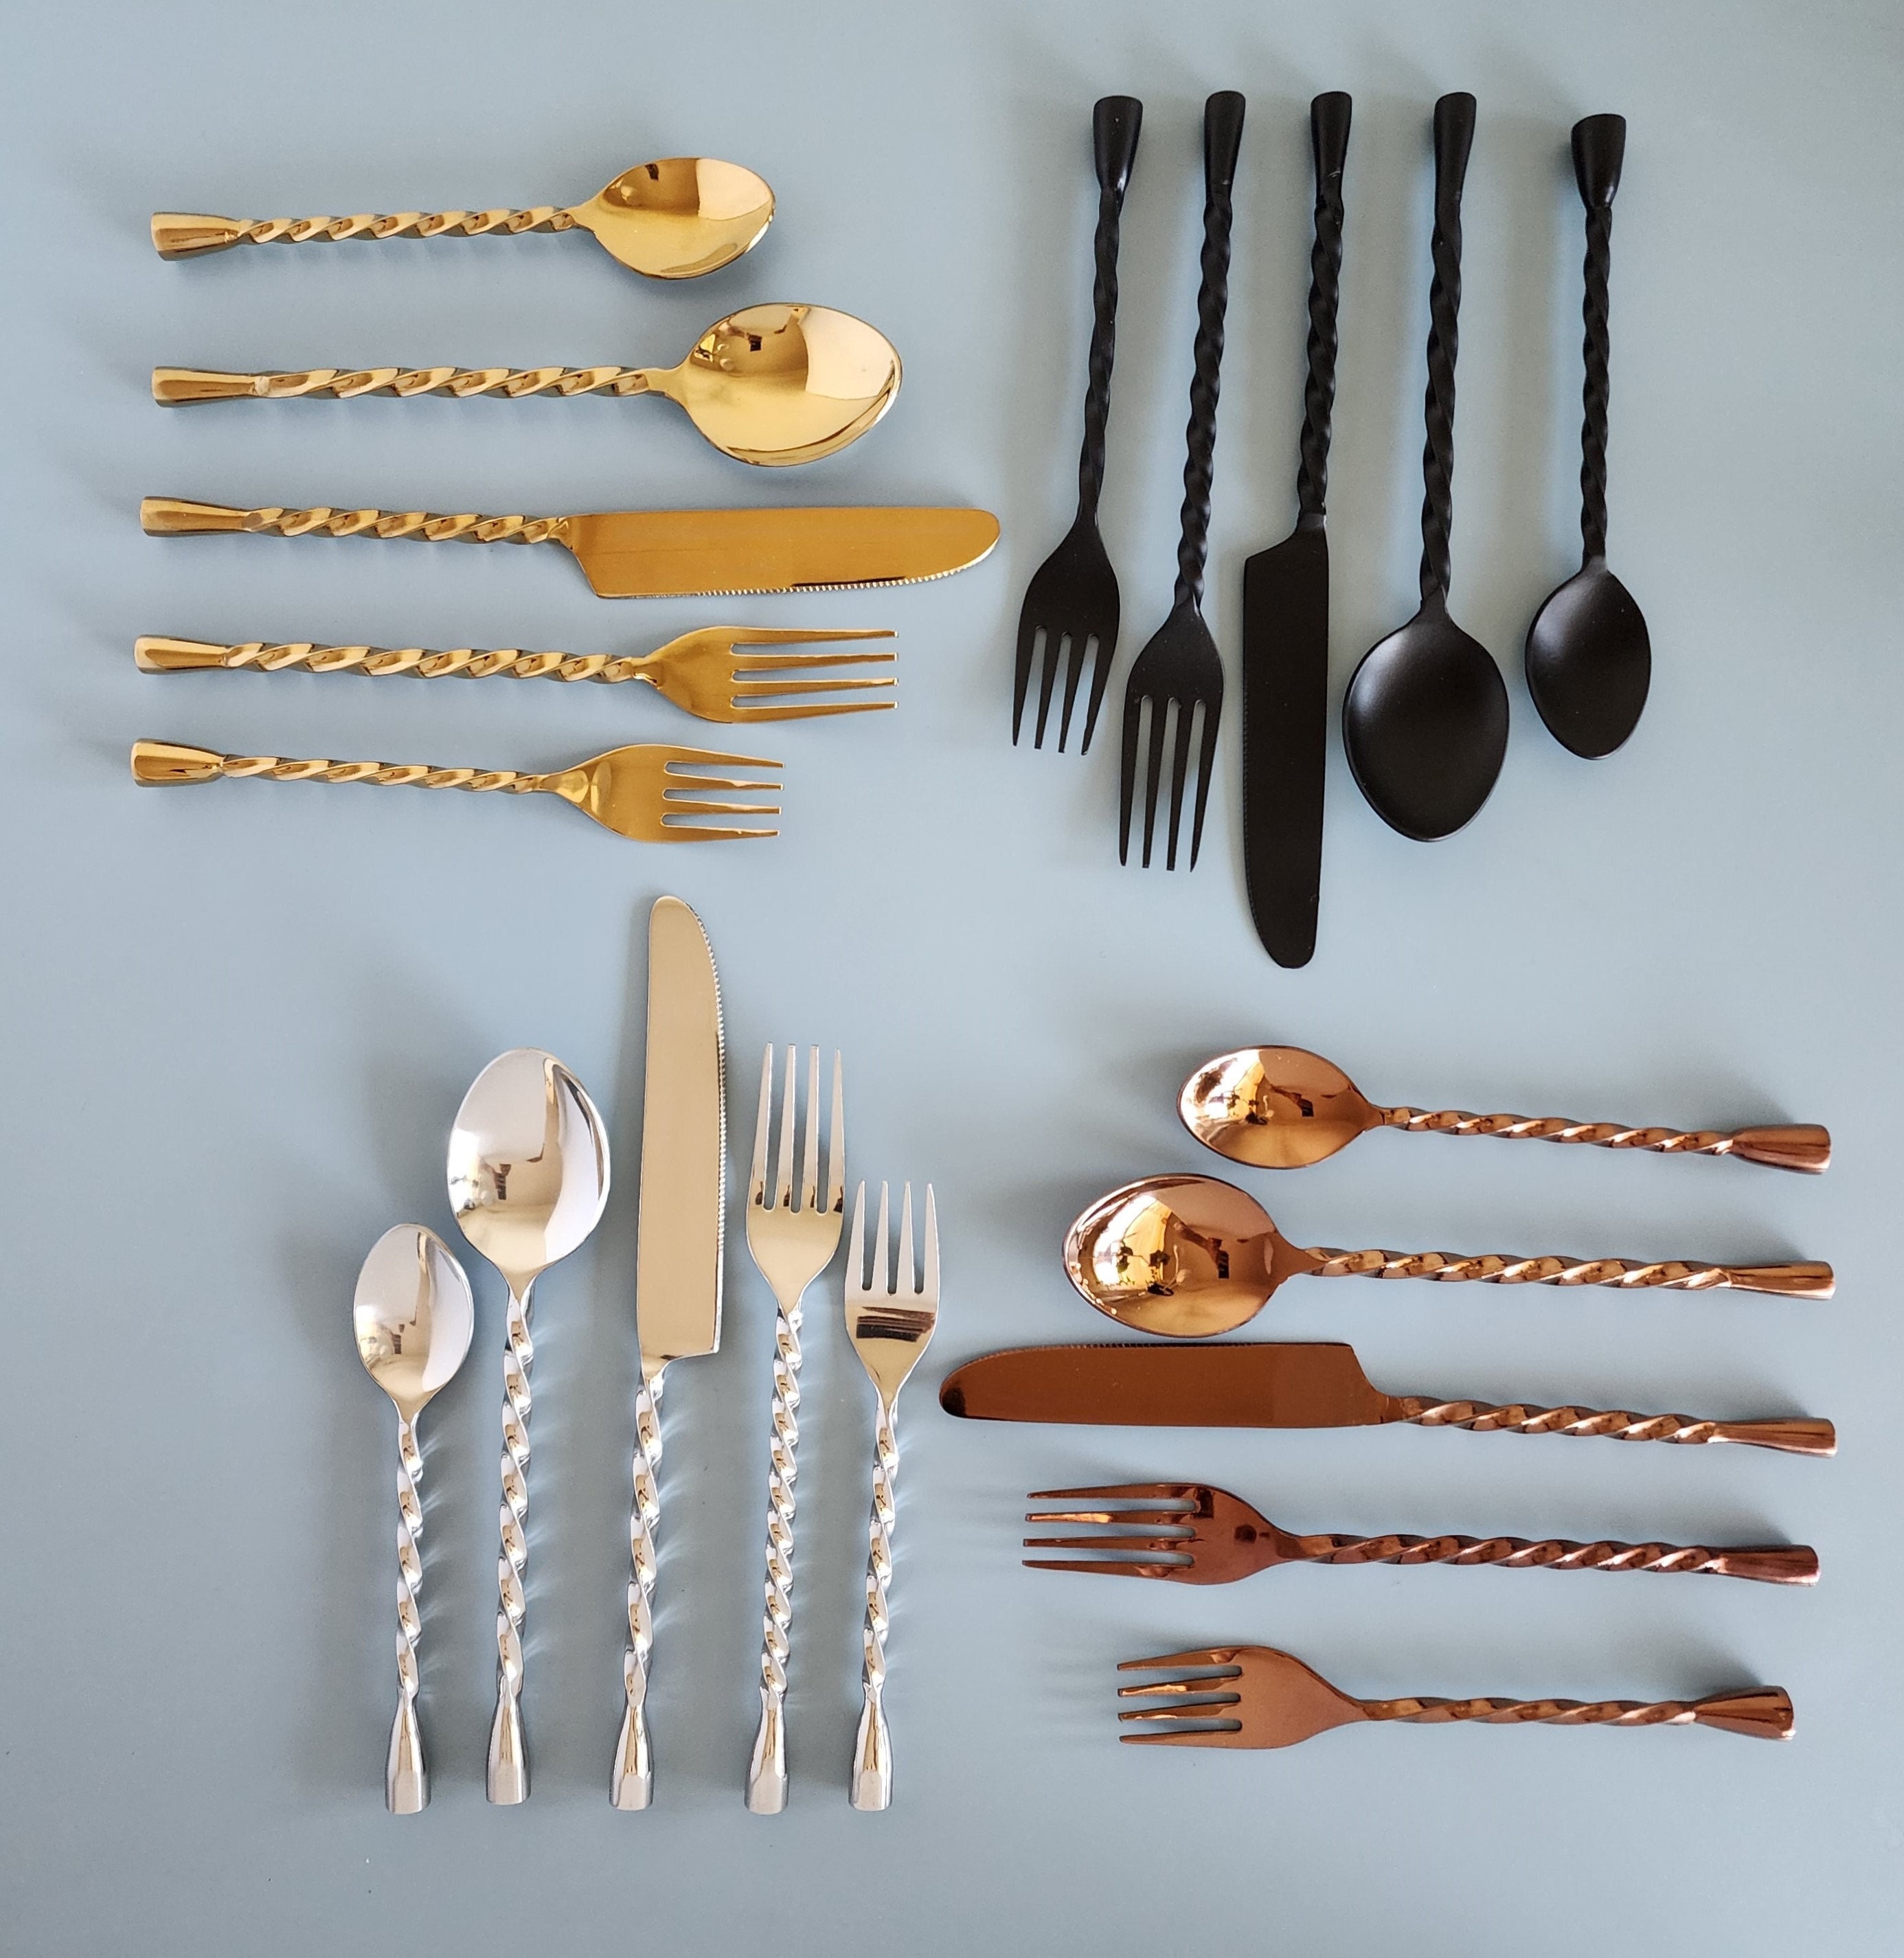 7 Pc Kitchen Gadget Set Copper Coated Stainless Steel Utensils